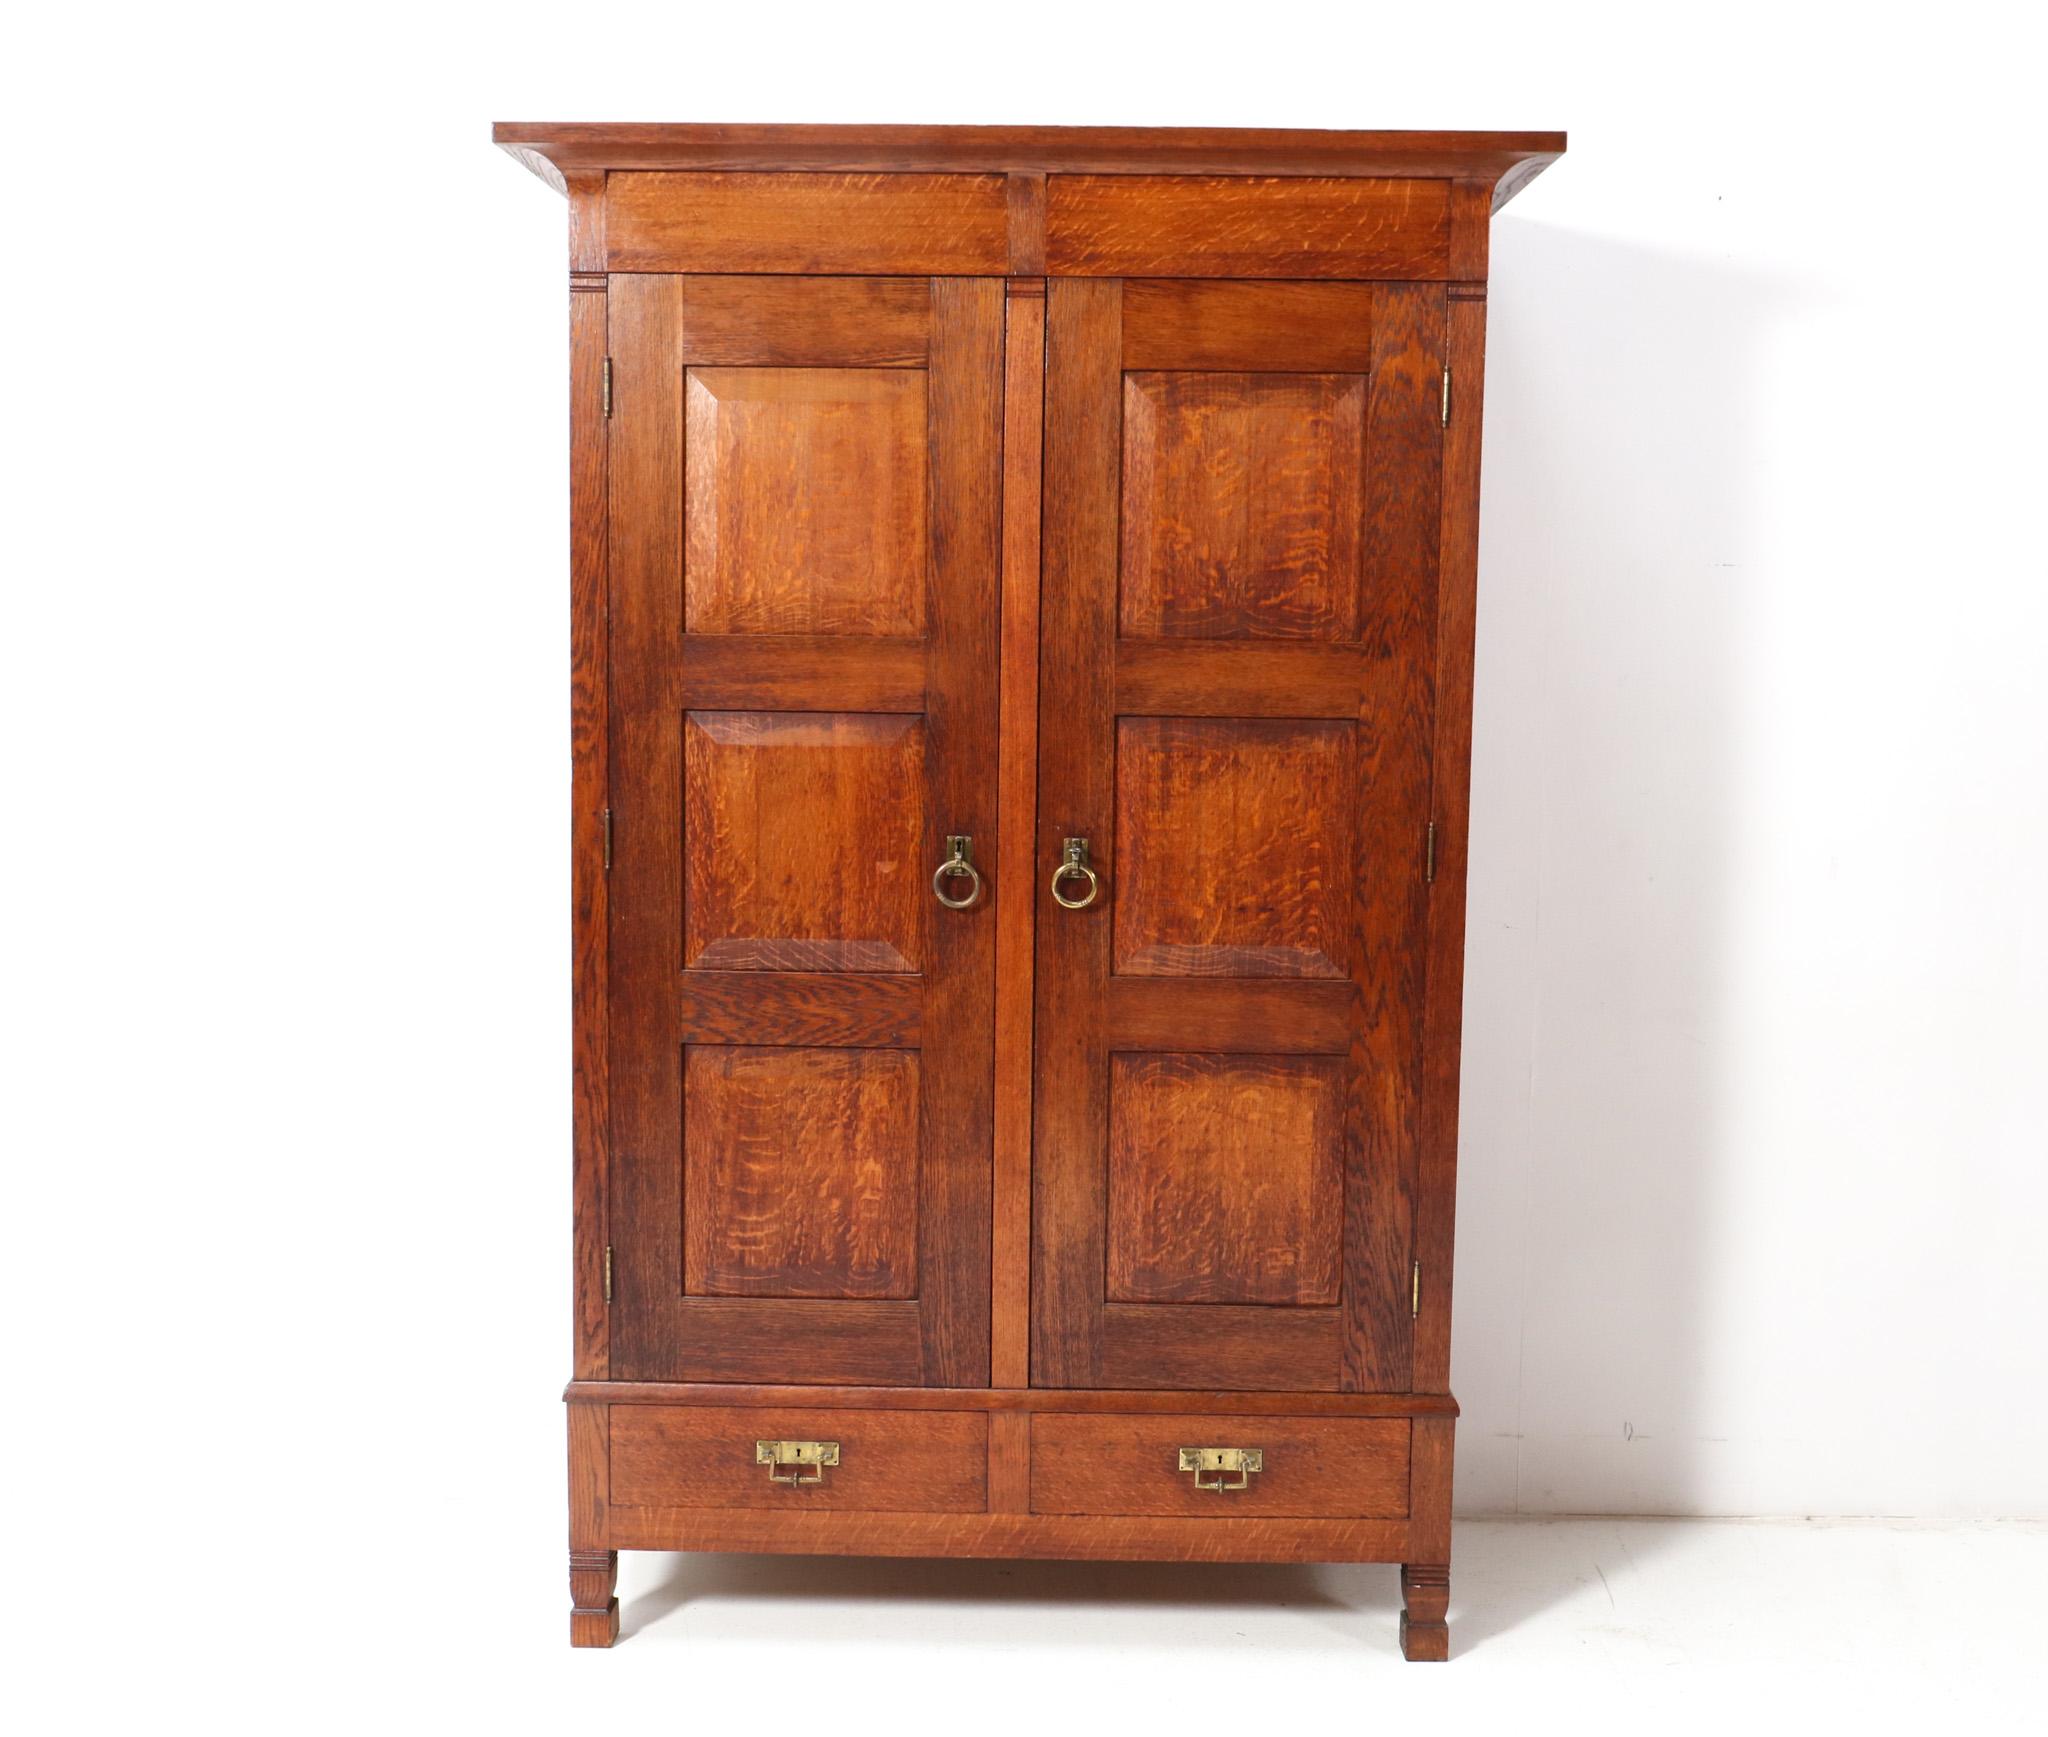 Magnificent and ultra rare Arts & Crafts Rationalist armoire or wardrobe.
Design by Willem Penaat for De Woning Amsterdam.
Striking Dutch design from the 1900s.
Solid oak with original brass handles on doors and drawers.
The brass handles were